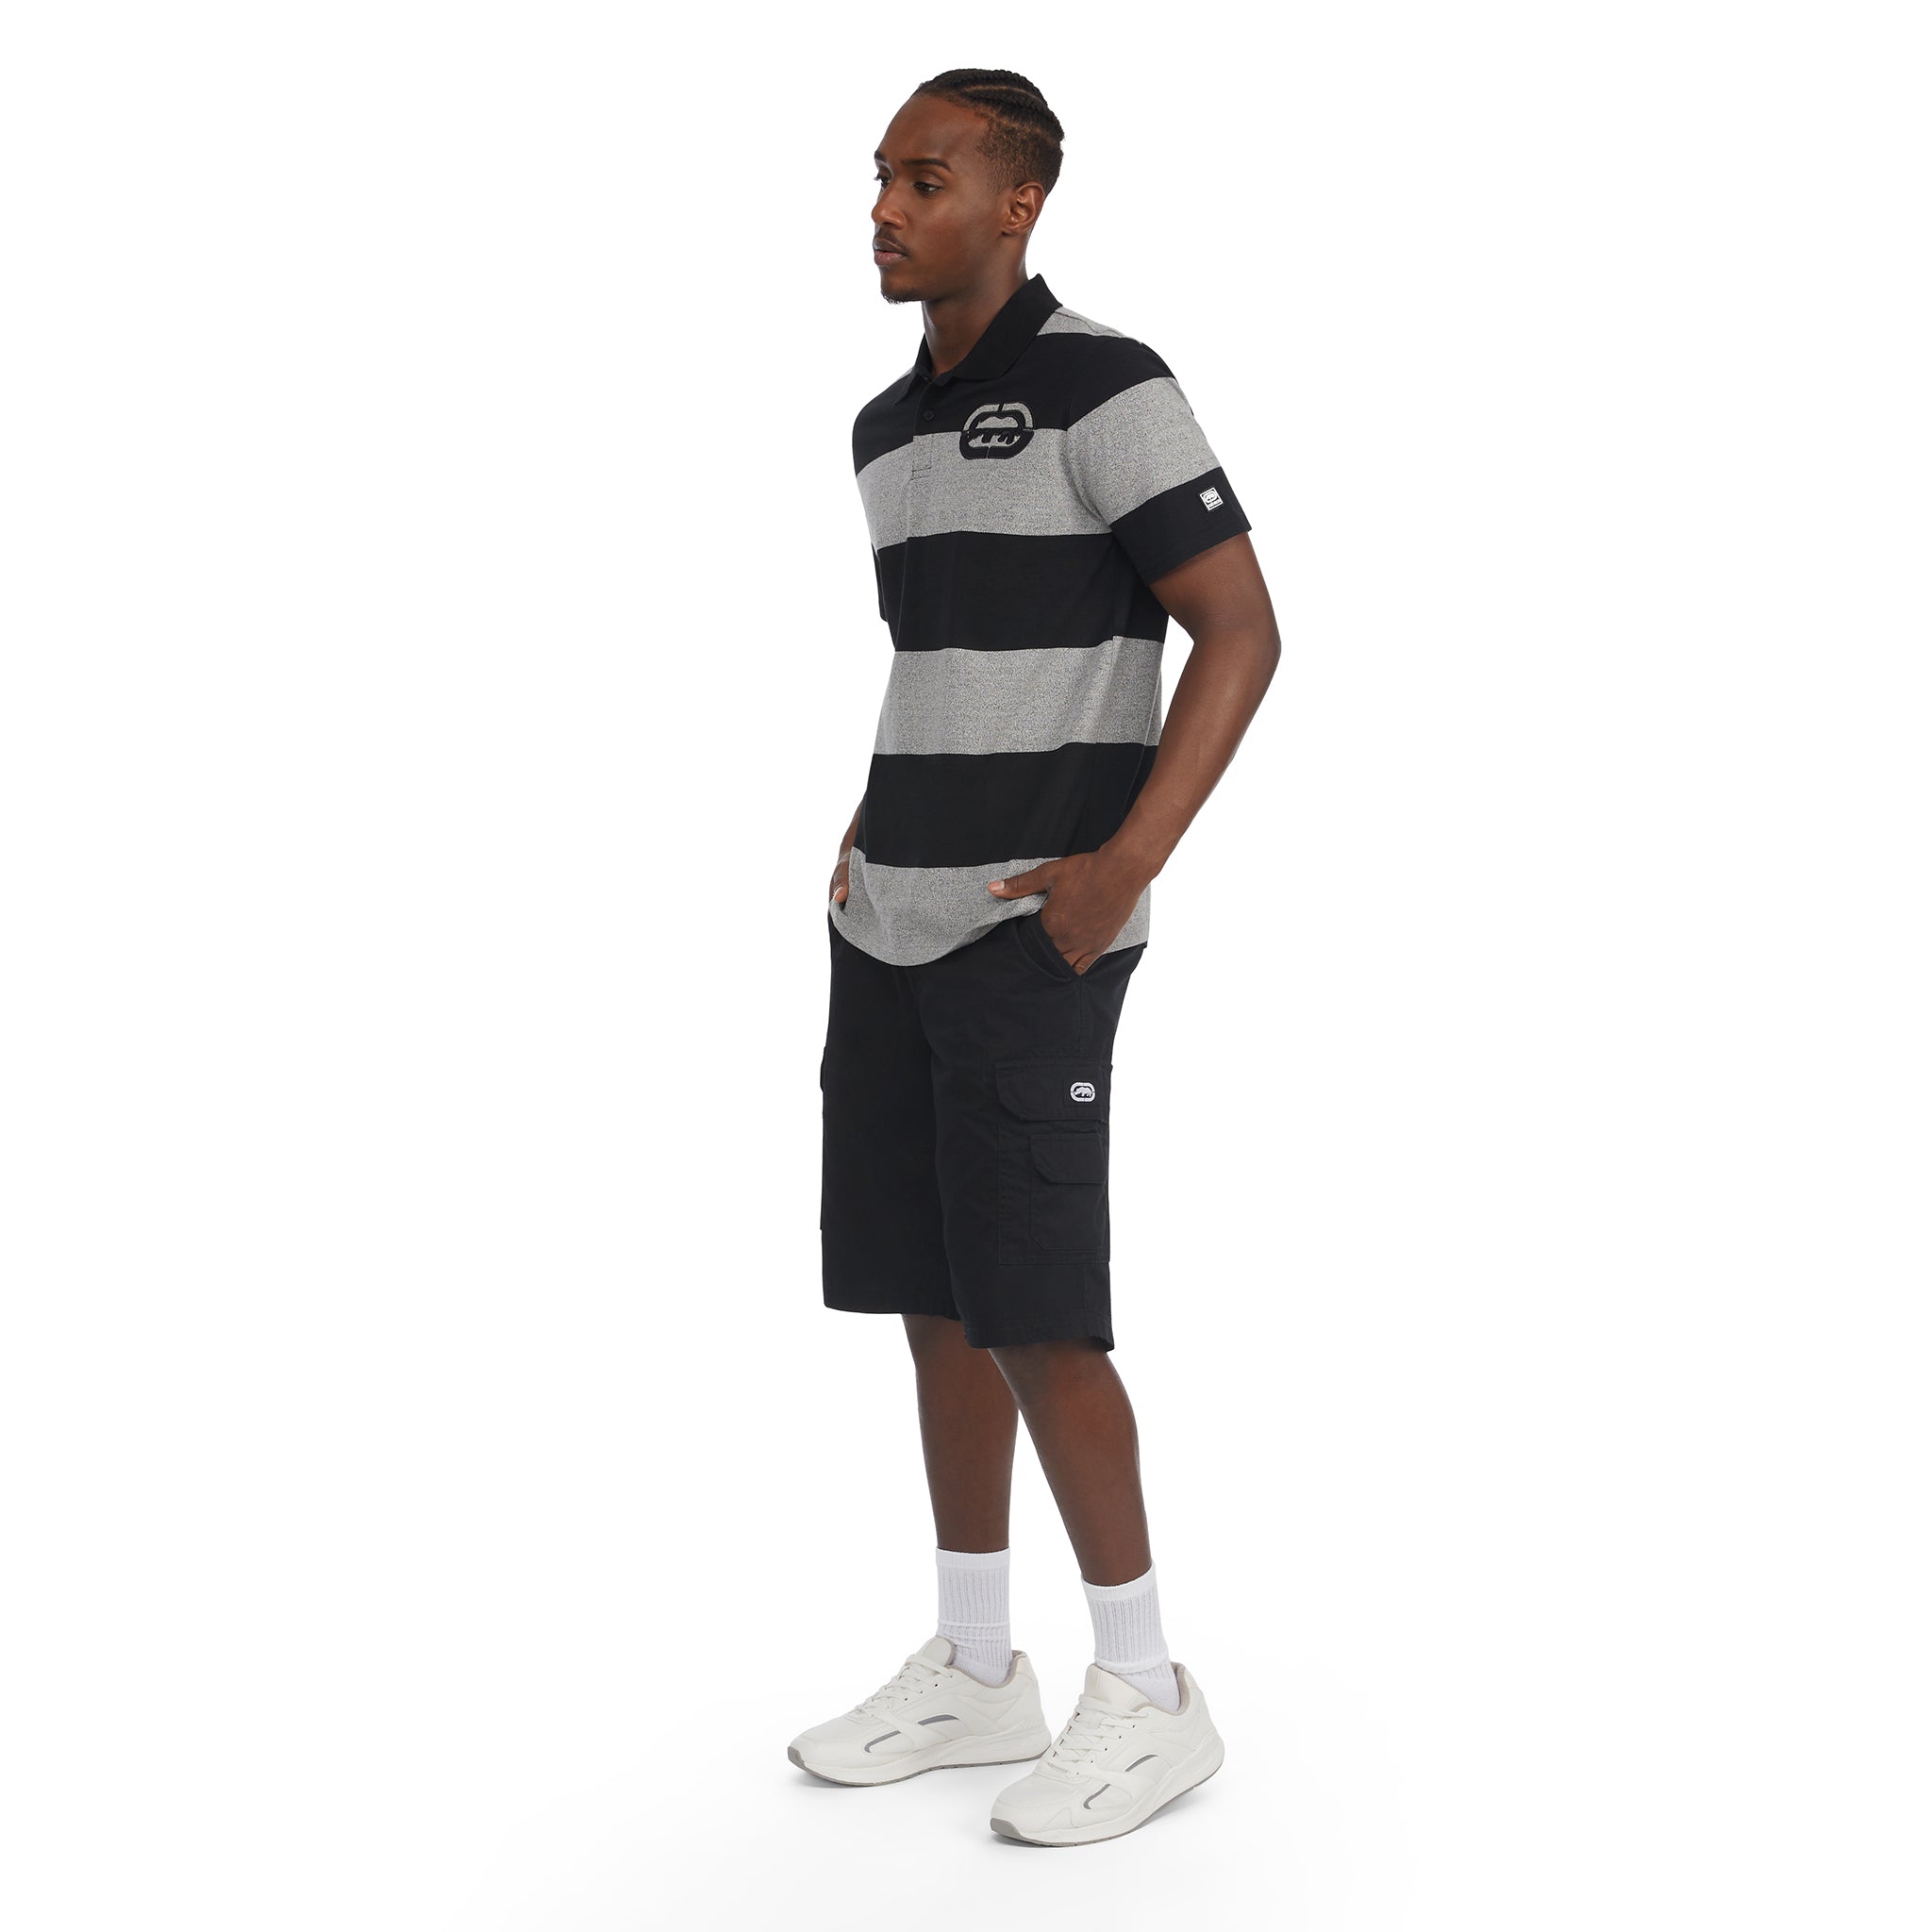 The Lead Belted Cargo Short